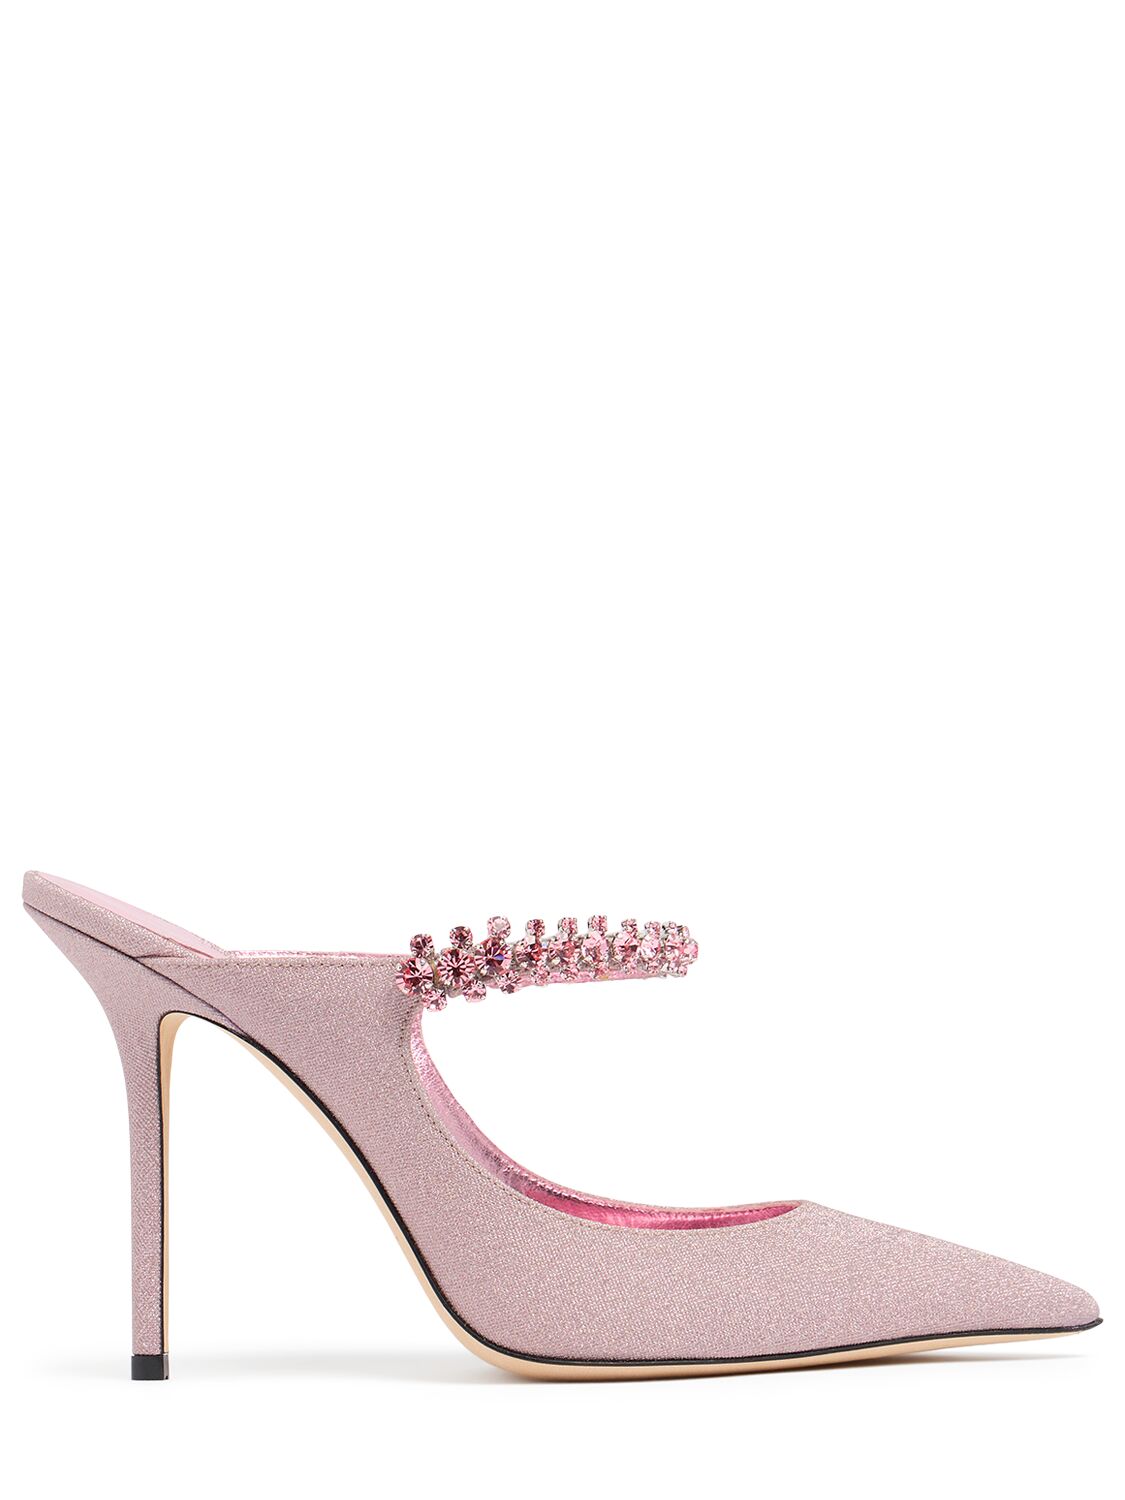 Jimmy Choo 100mm Bling Glittered Pumps In Rose/pink Mix